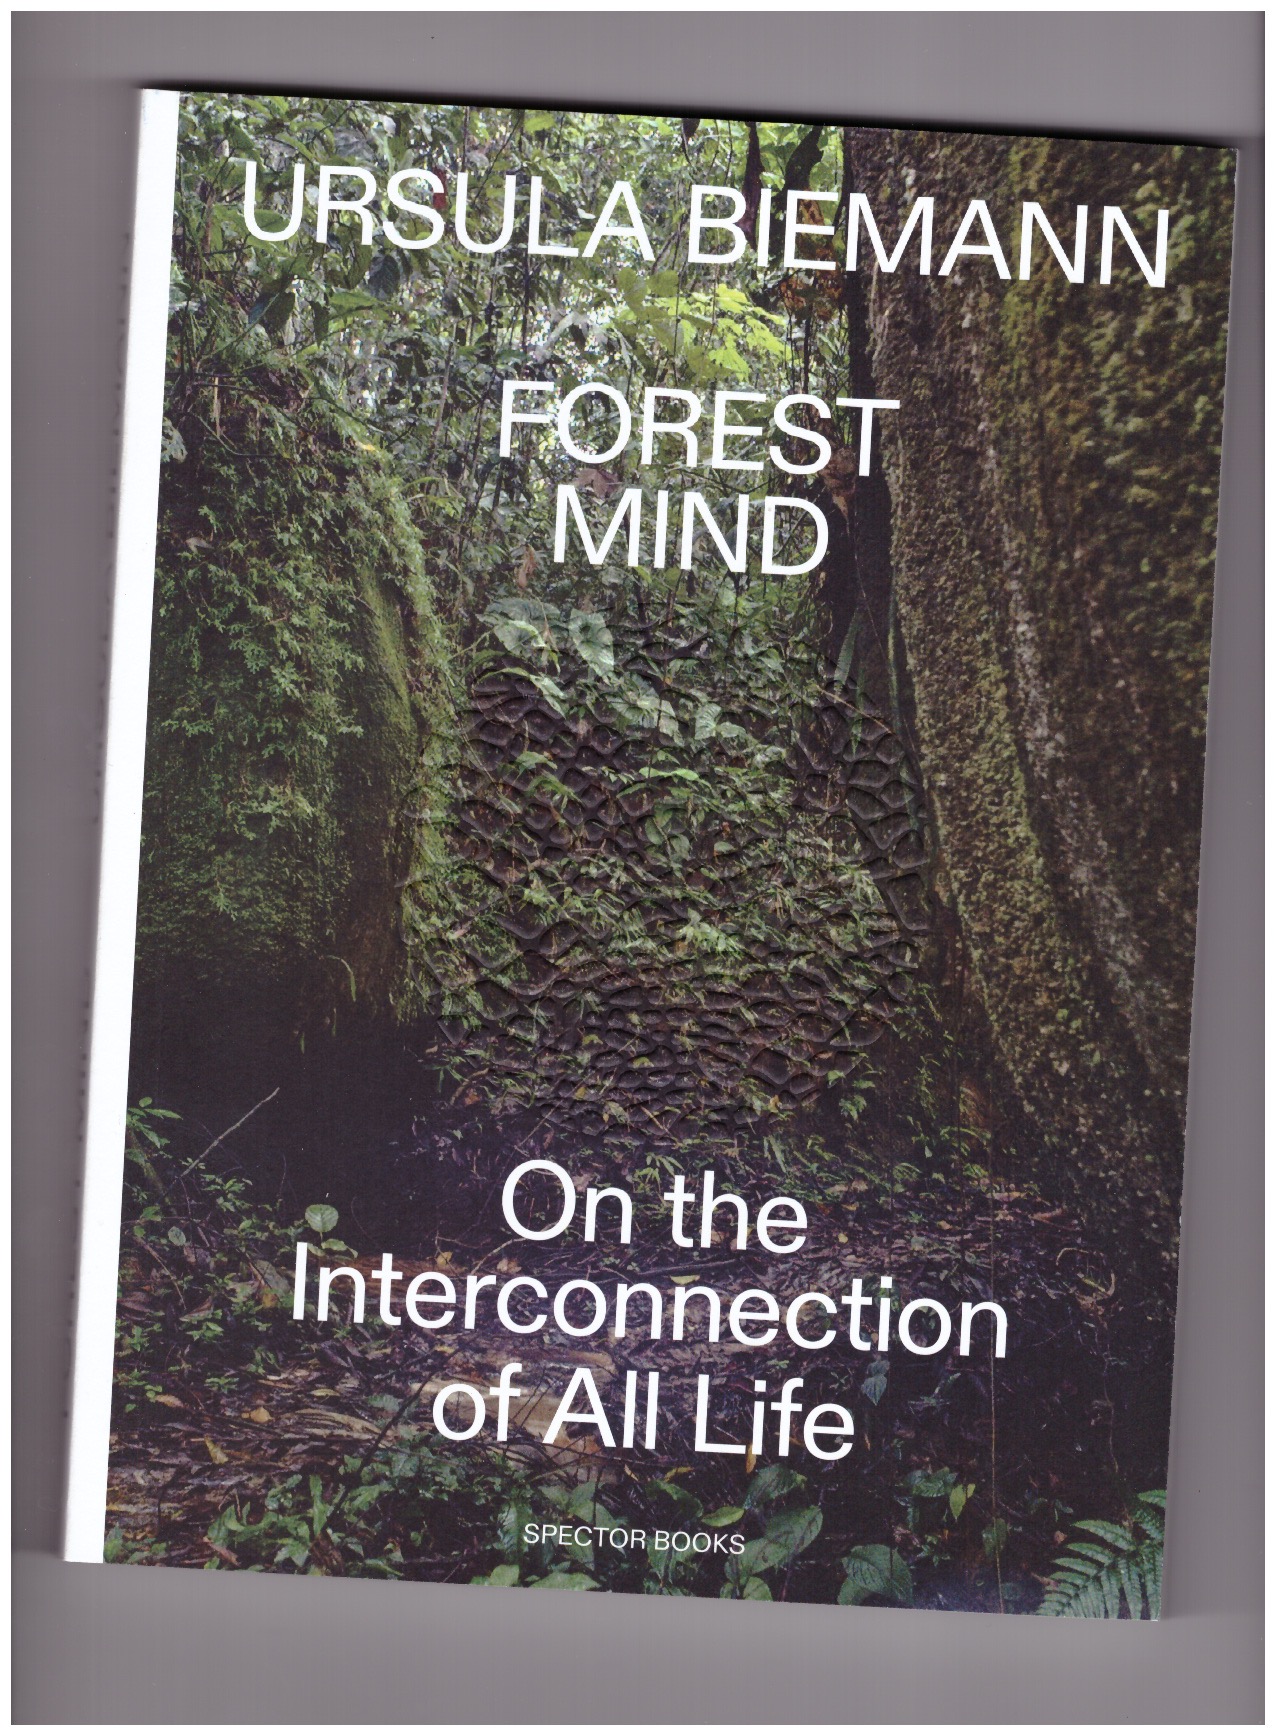 BIEMANN, Ursula - Forest Mind - On the Interconnection of All Life